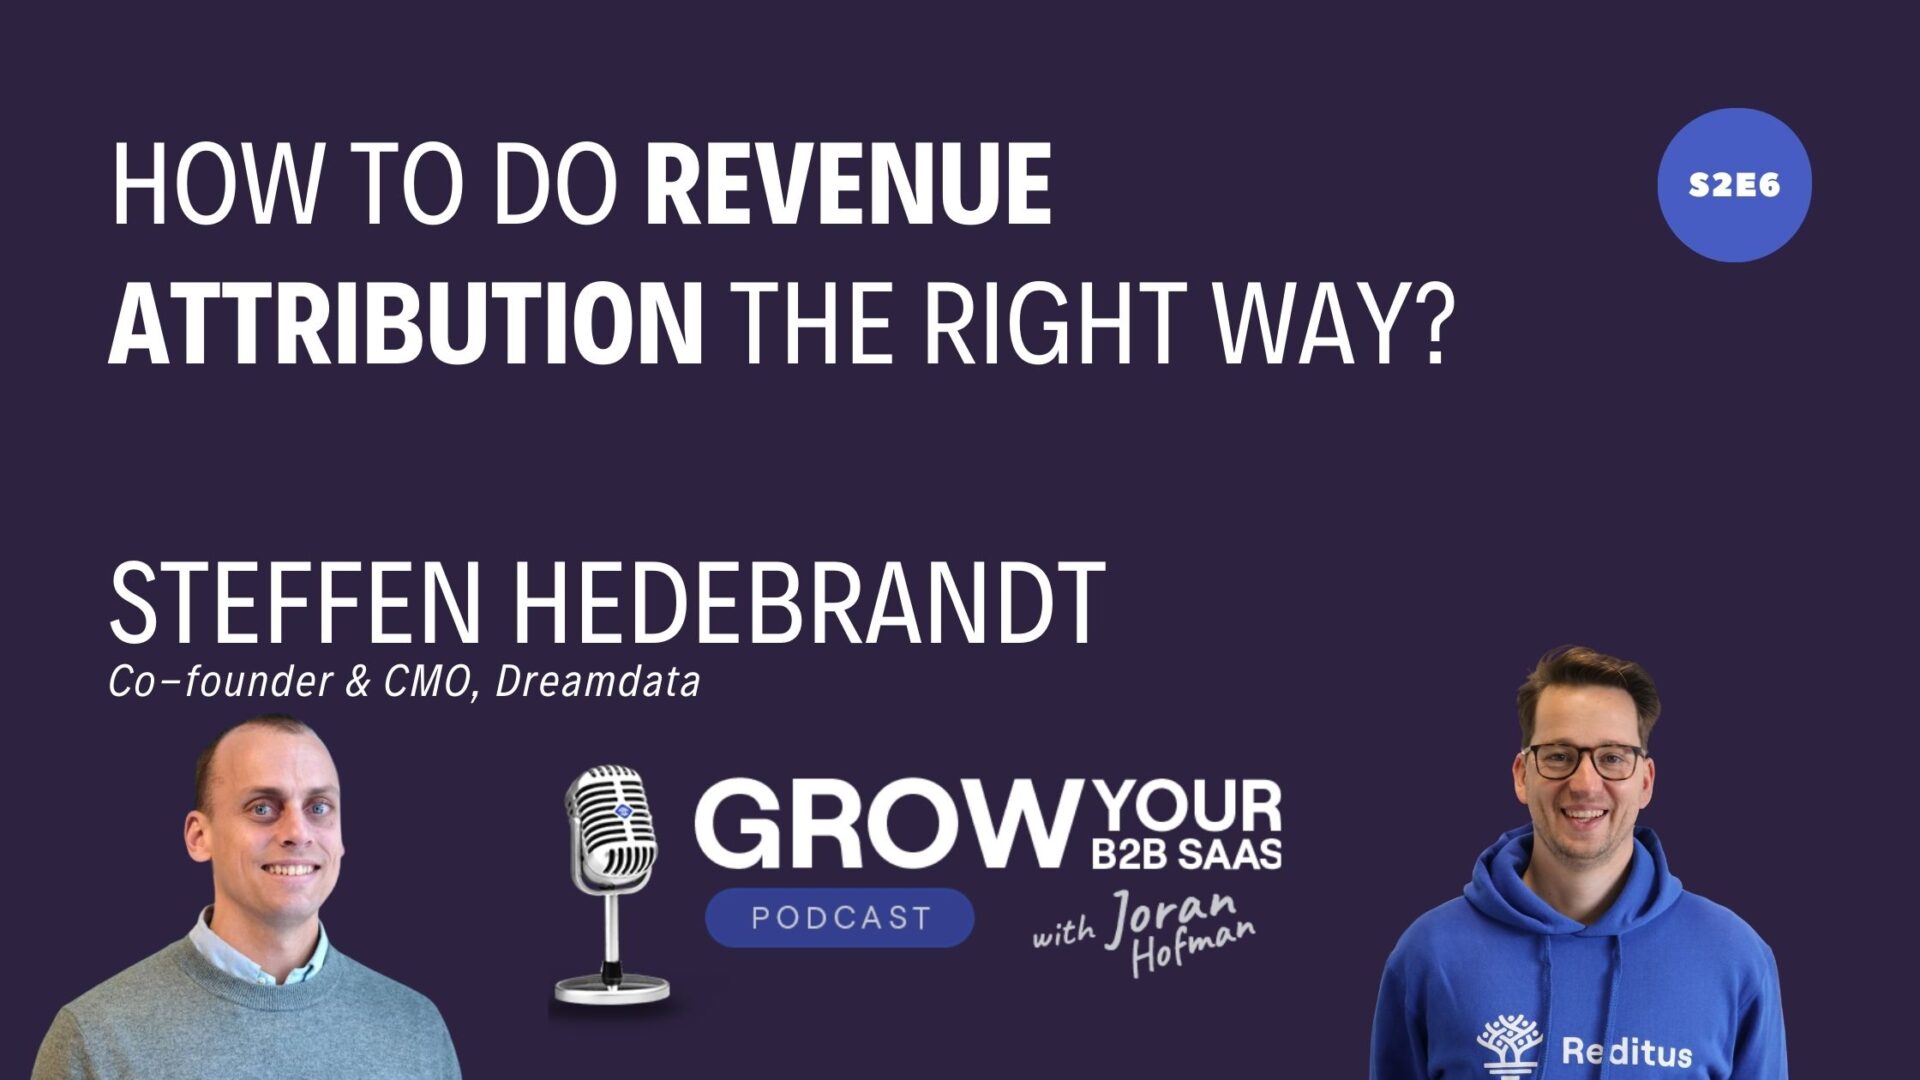 S2E6 – How to do revenue attribution the right way? With Steffen Hedebrandt